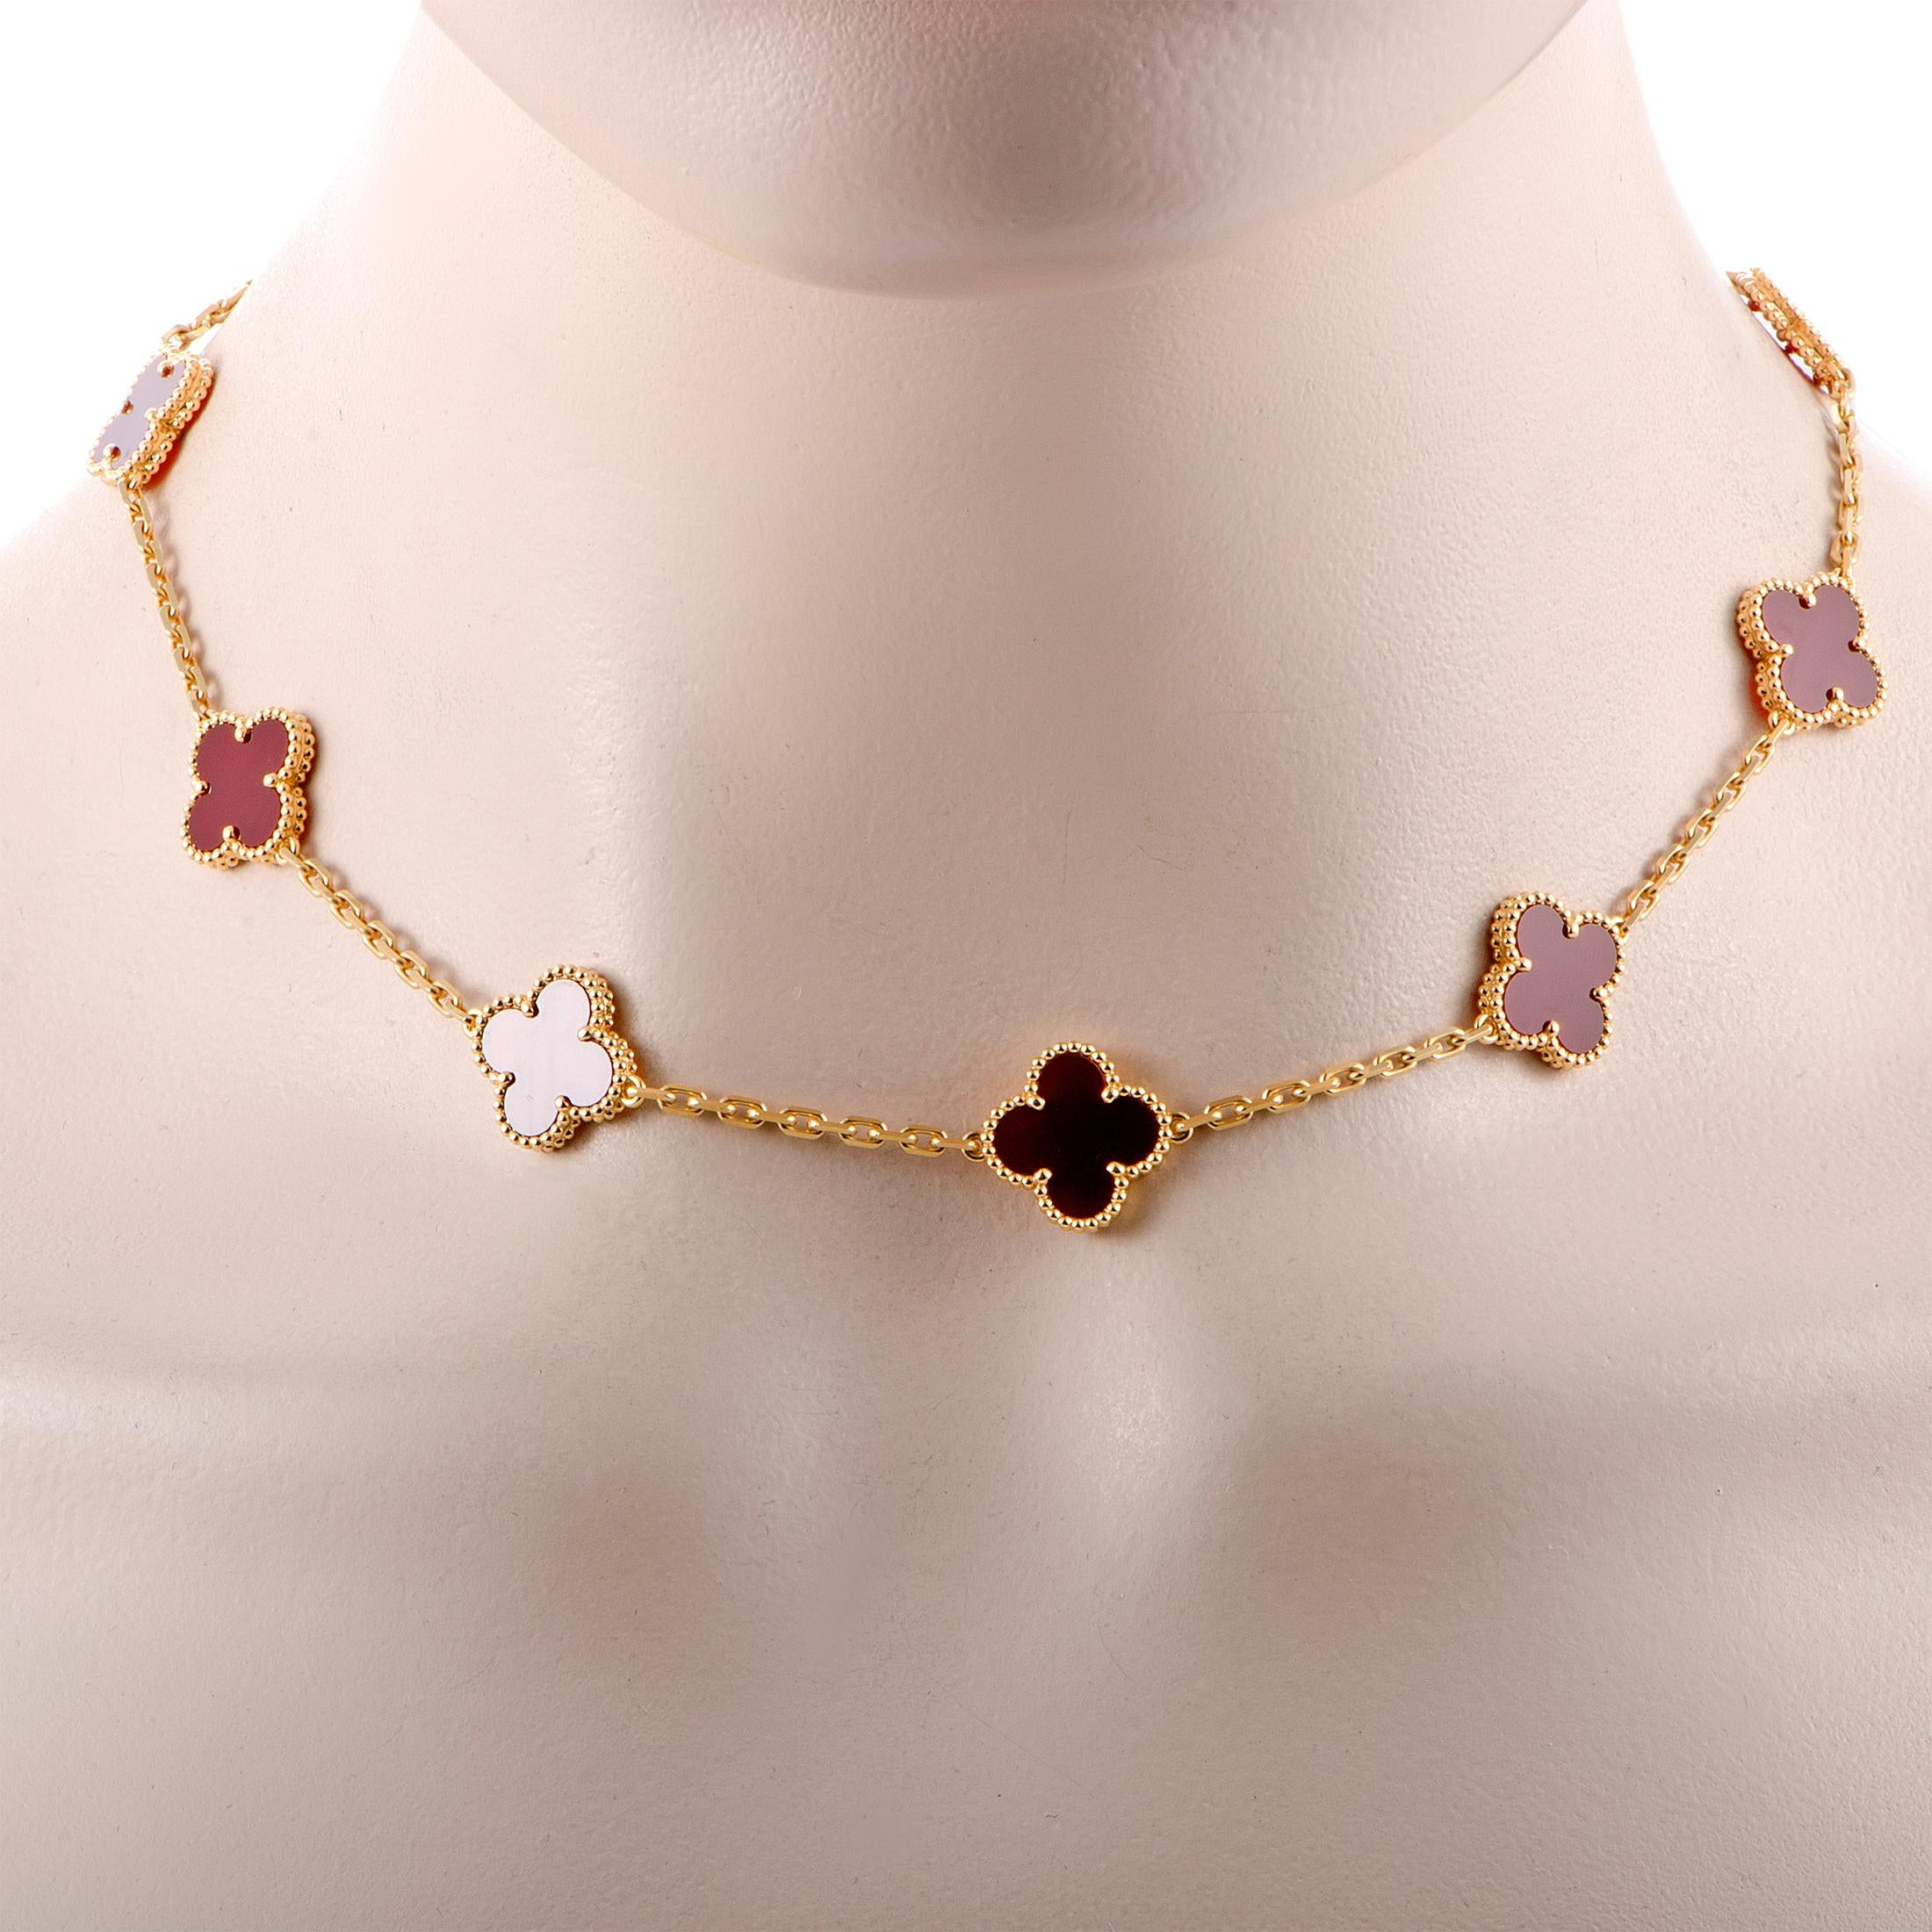 The Van Cleef & Arpels “Vintage Alhambra” necklace is crafted from 18K yellow gold and decorated with carnelians. The necklace weighs 22.2 grams and measures 16” in length.